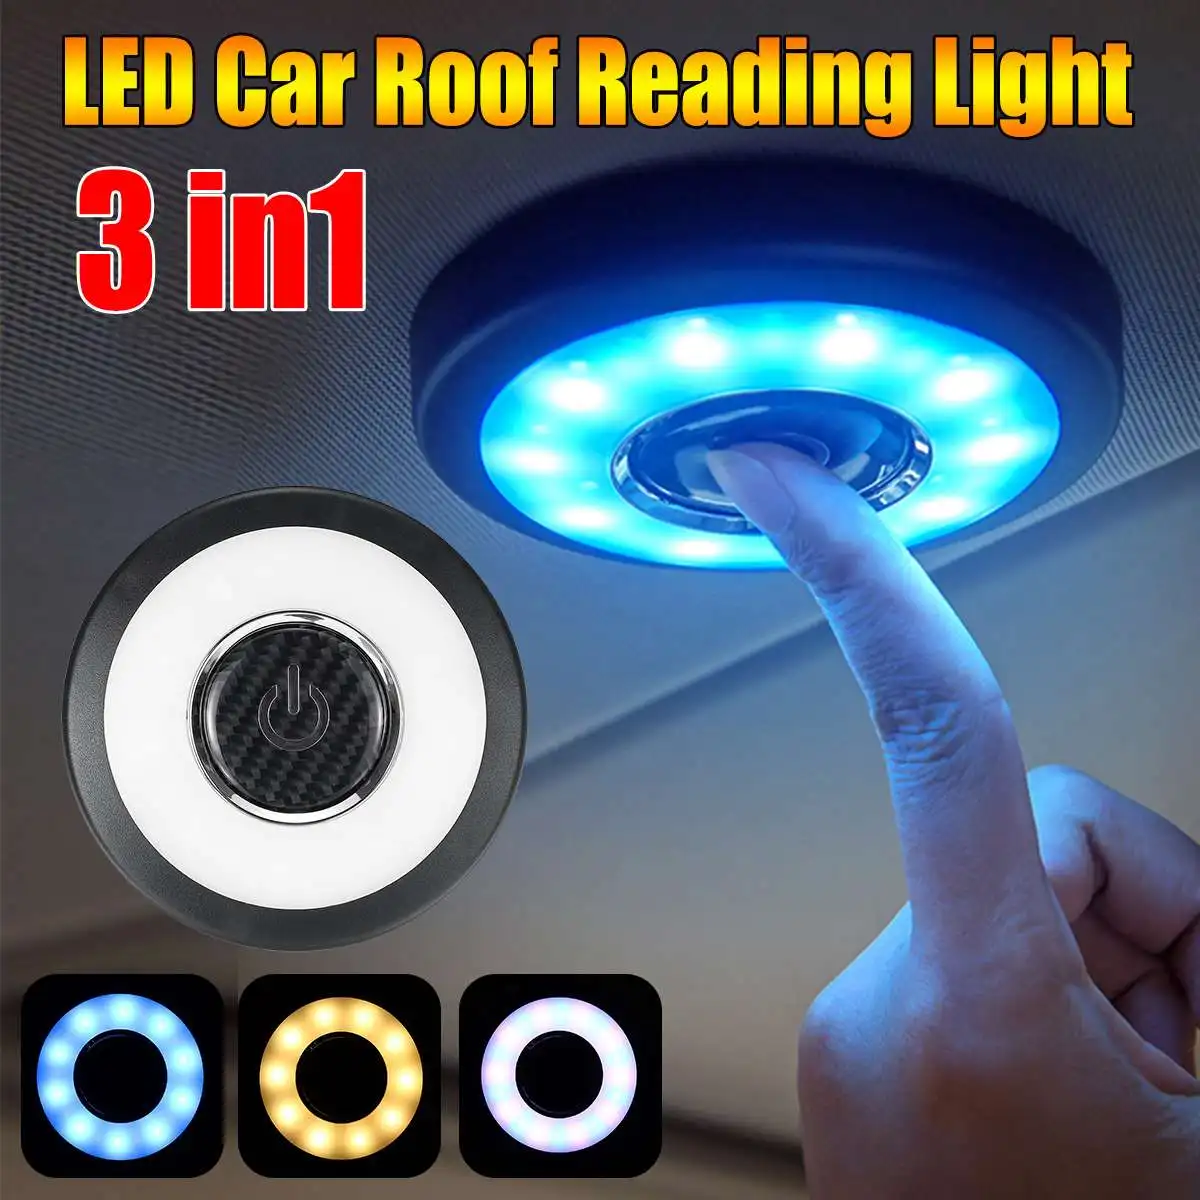 USB Rechargeable Car Celling Roof Light Trunk Interior Dome Light Magnet Stick on Closet Light for Backseat Cabinet Wardrobe Counter Kitchen GIGAMALL LED Auto Interior Reading Light Blue White 